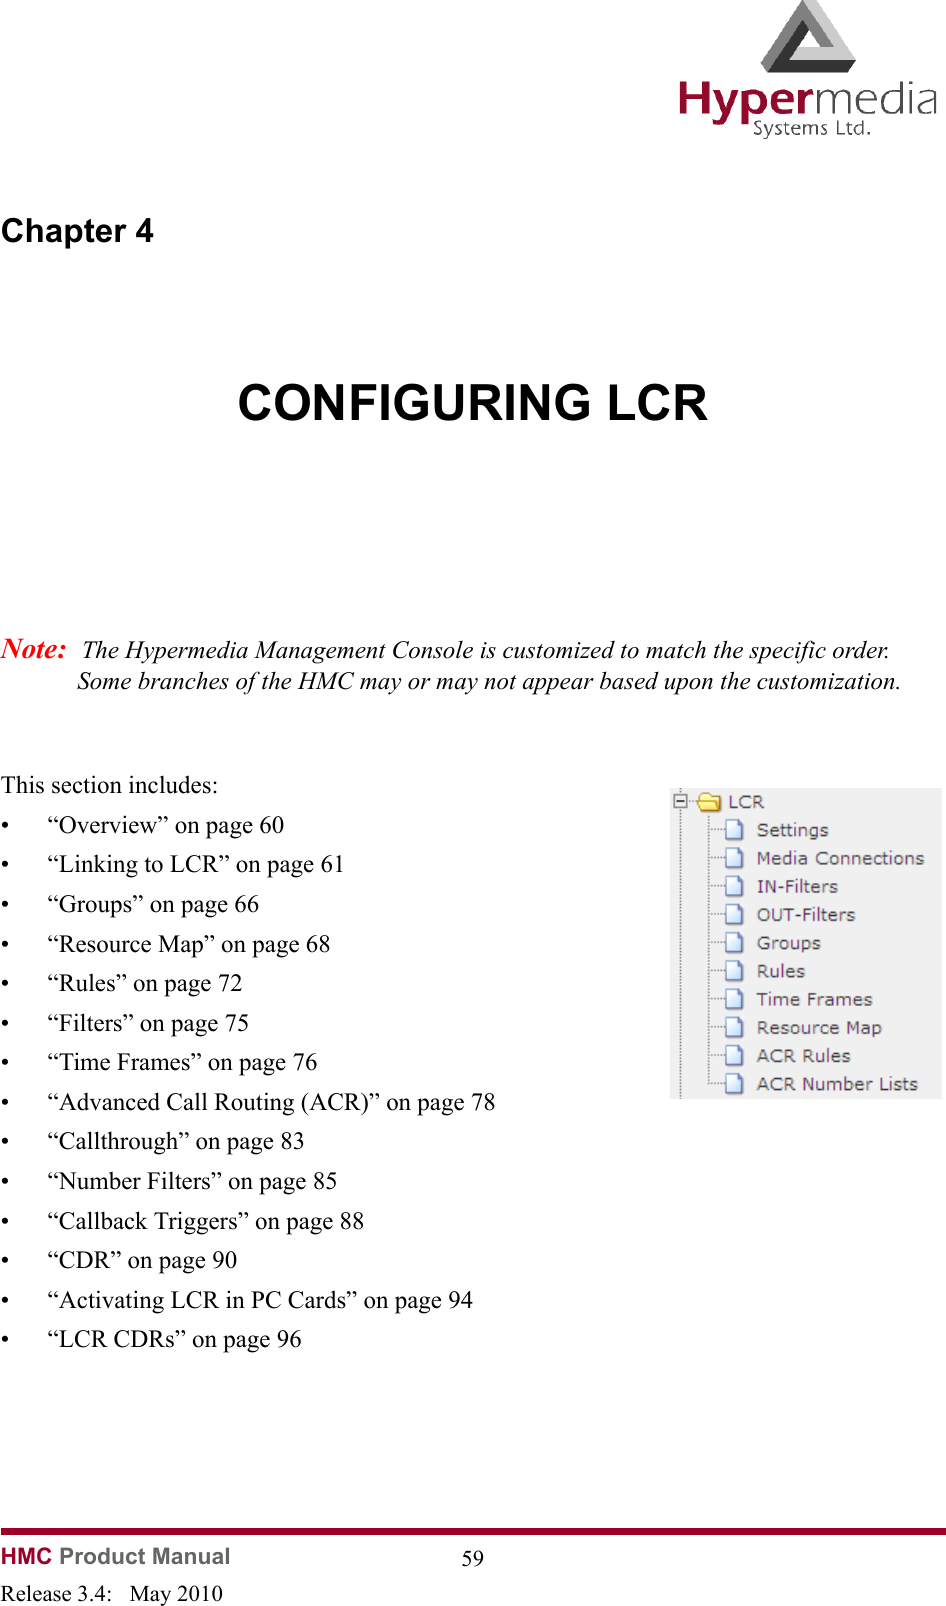 HMC Product Manual  59Release 3.4:   May 2010Chapter 4CONFIGURING LCRNote:  The Hypermedia Management Console is customized to match the specific order.  Some branches of the HMC may or may not appear based upon the customization.              This section includes:• “Overview” on page 60• “Linking to LCR” on page 61• “Groups” on page 66• “Resource Map” on page 68• “Rules” on page 72• “Filters” on page 75• “Time Frames” on page 76• “Advanced Call Routing (ACR)” on page 78• “Callthrough” on page 83• “Number Filters” on page 85• “Callback Triggers” on page 88• “CDR” on page 90• “Activating LCR in PC Cards” on page 94• “LCR CDRs” on page 96